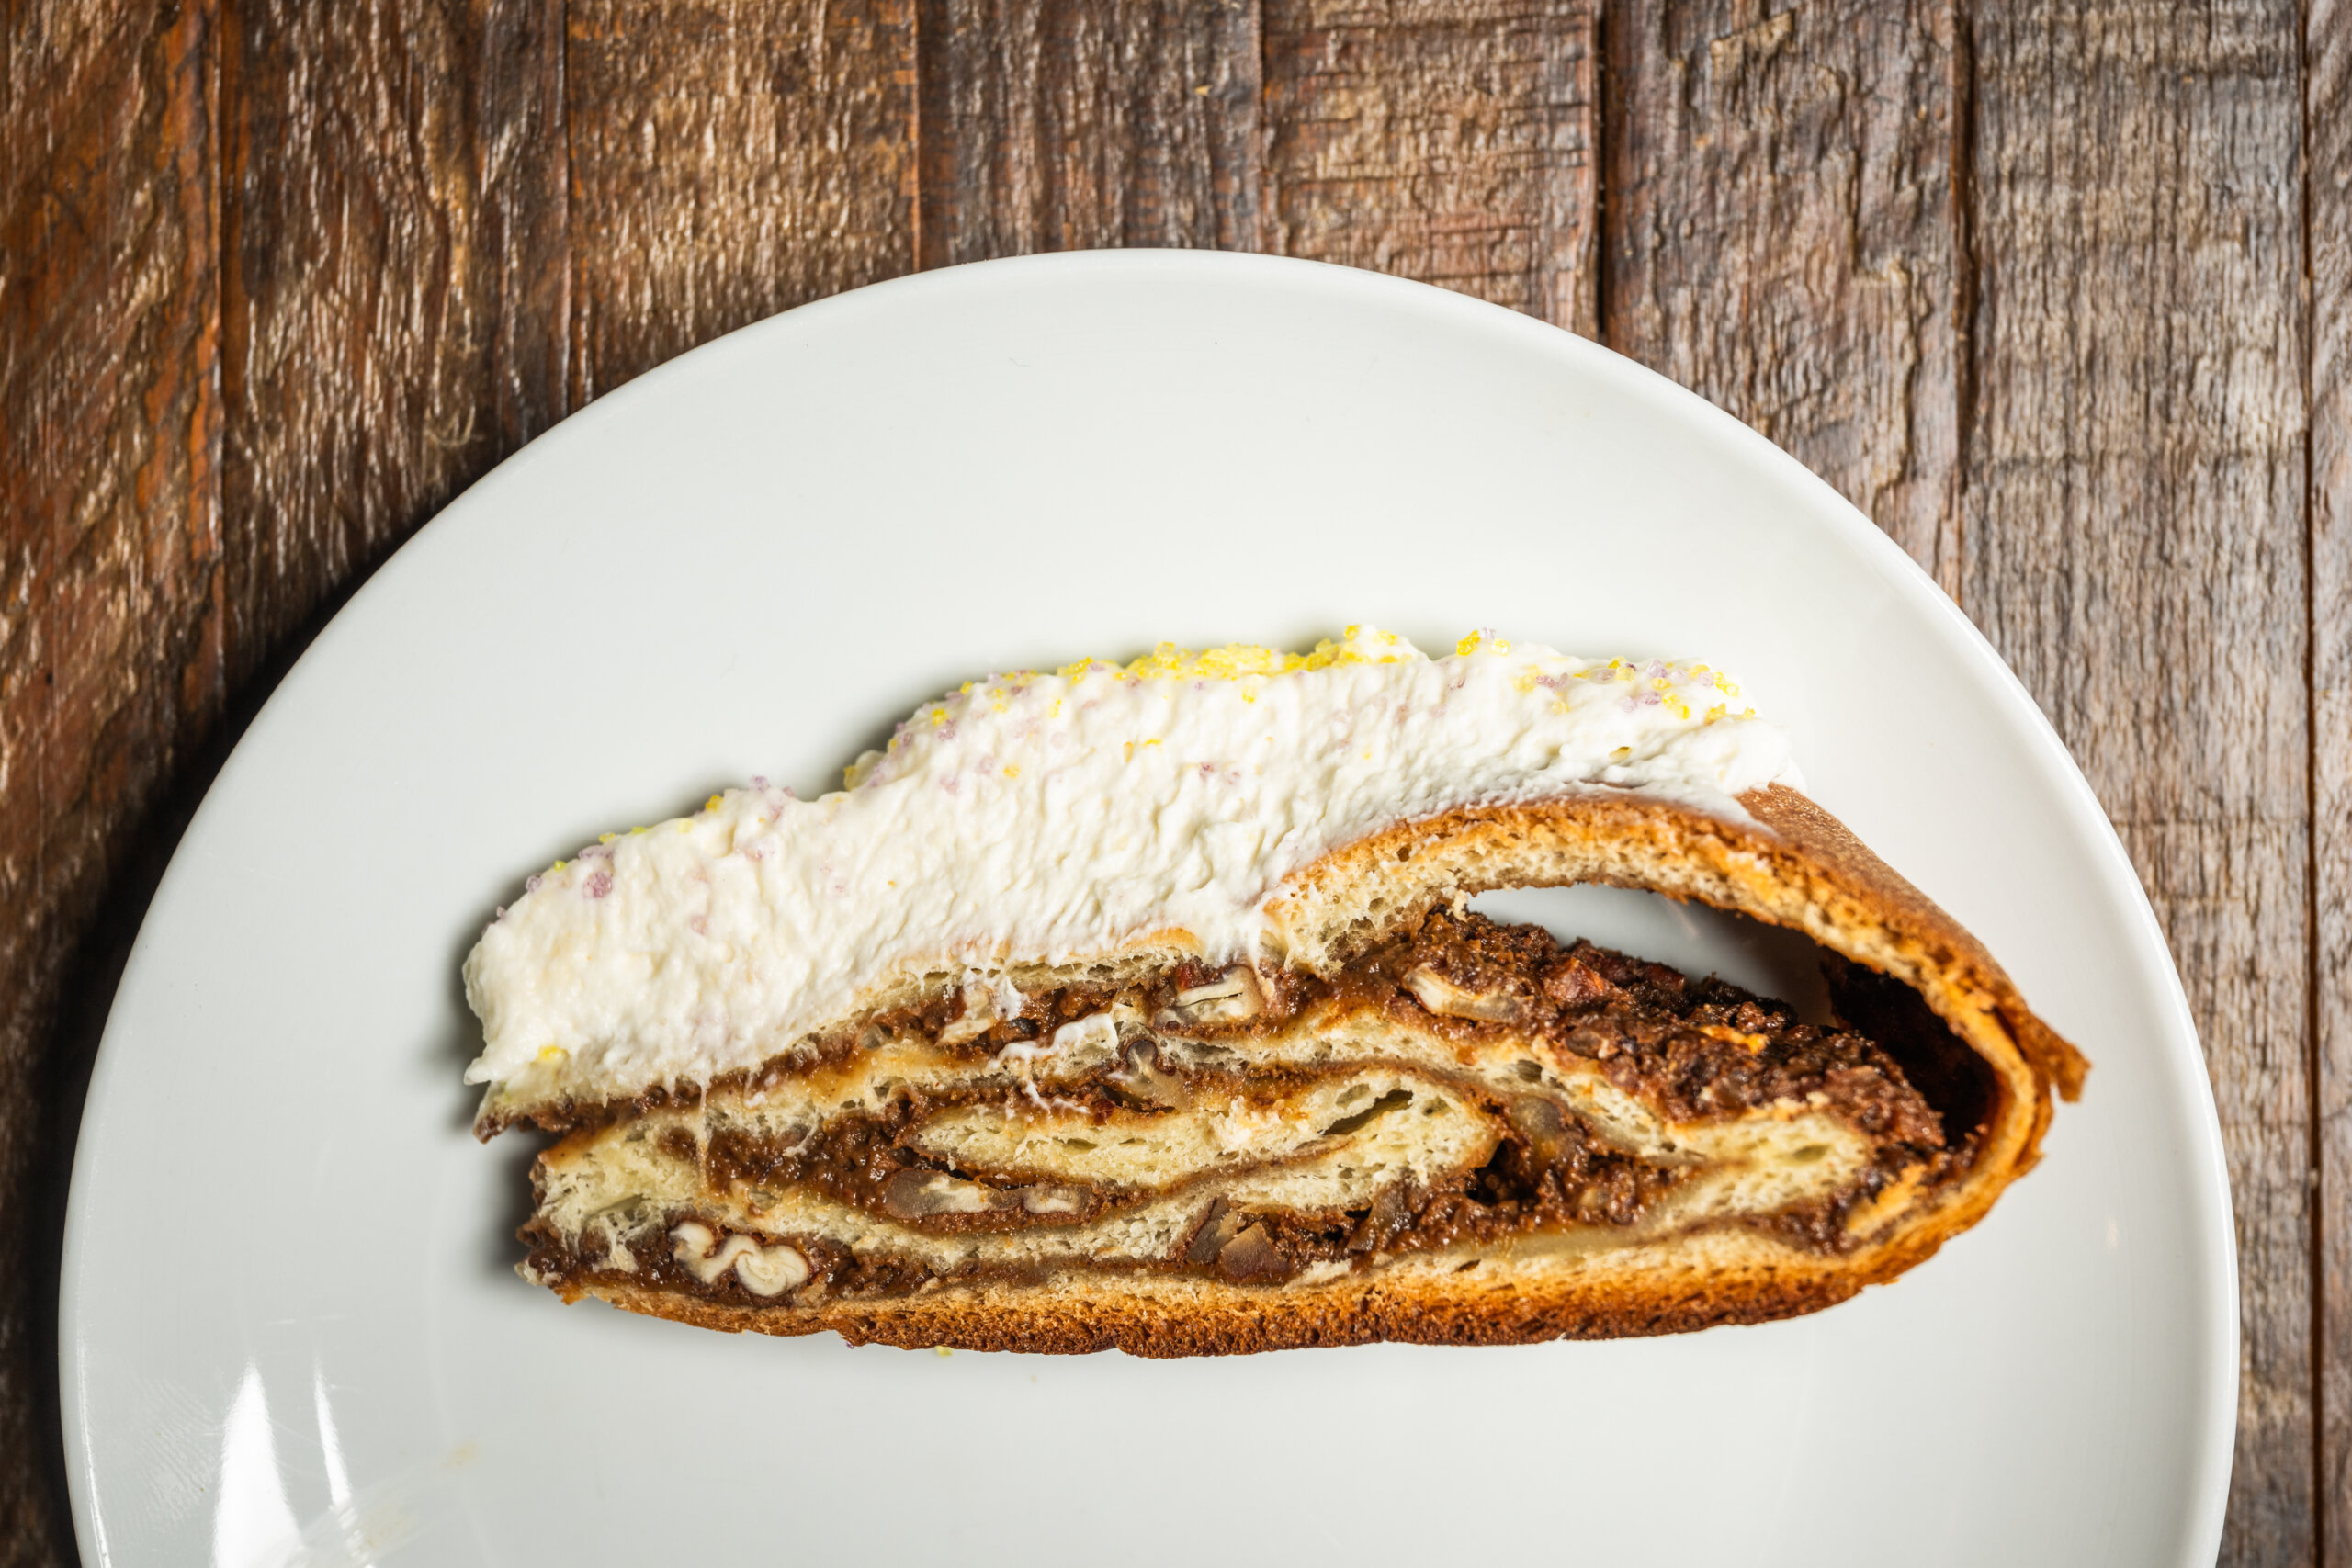 Layers of dough and prune and cream cheese filling in a slice of king cake